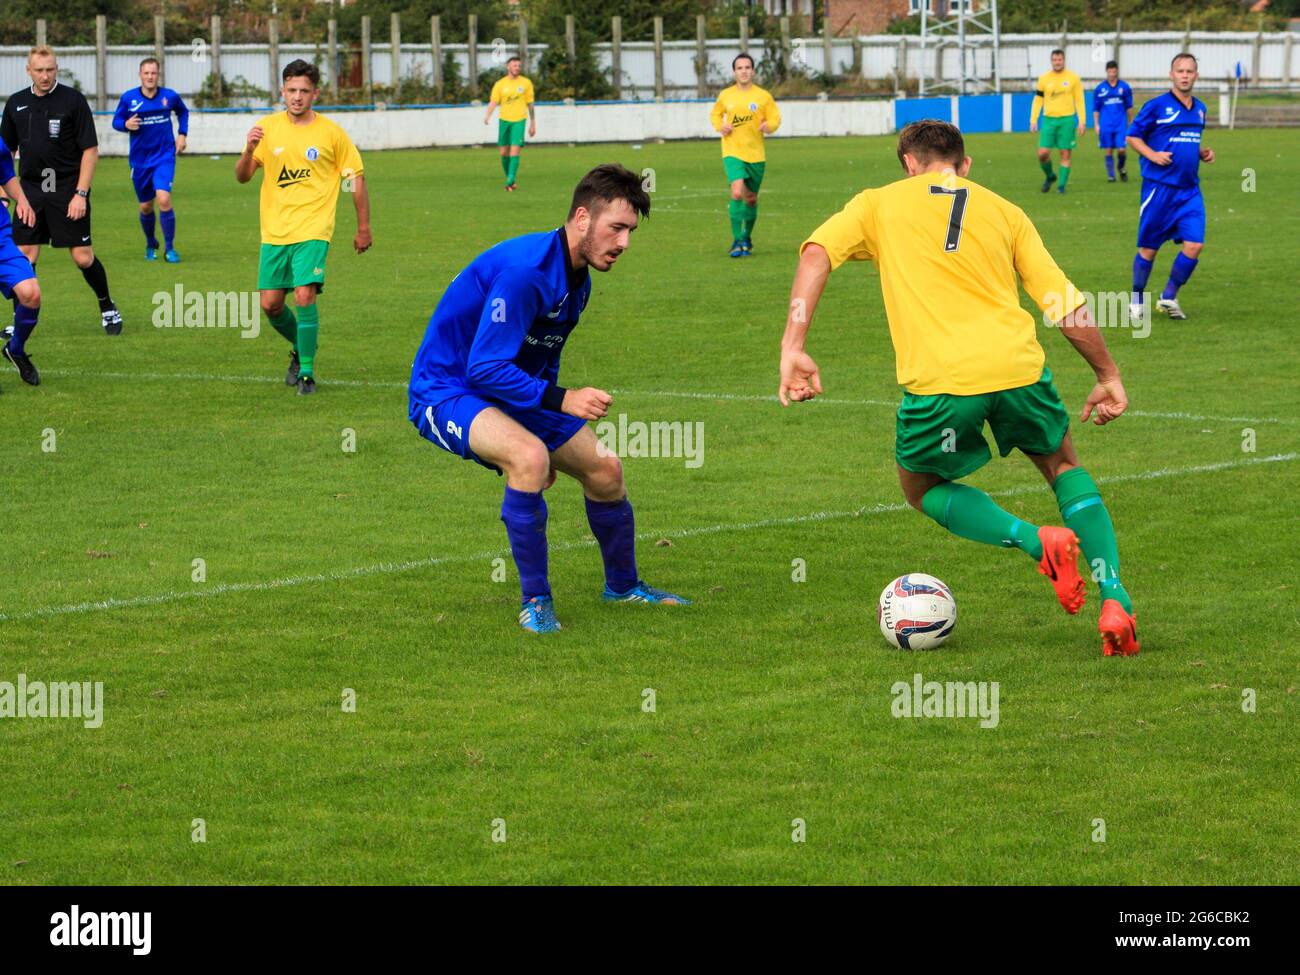 Local football match between Billingham and Stockton in north east England,UK. Winger trying to dribble past full back Stock Photo